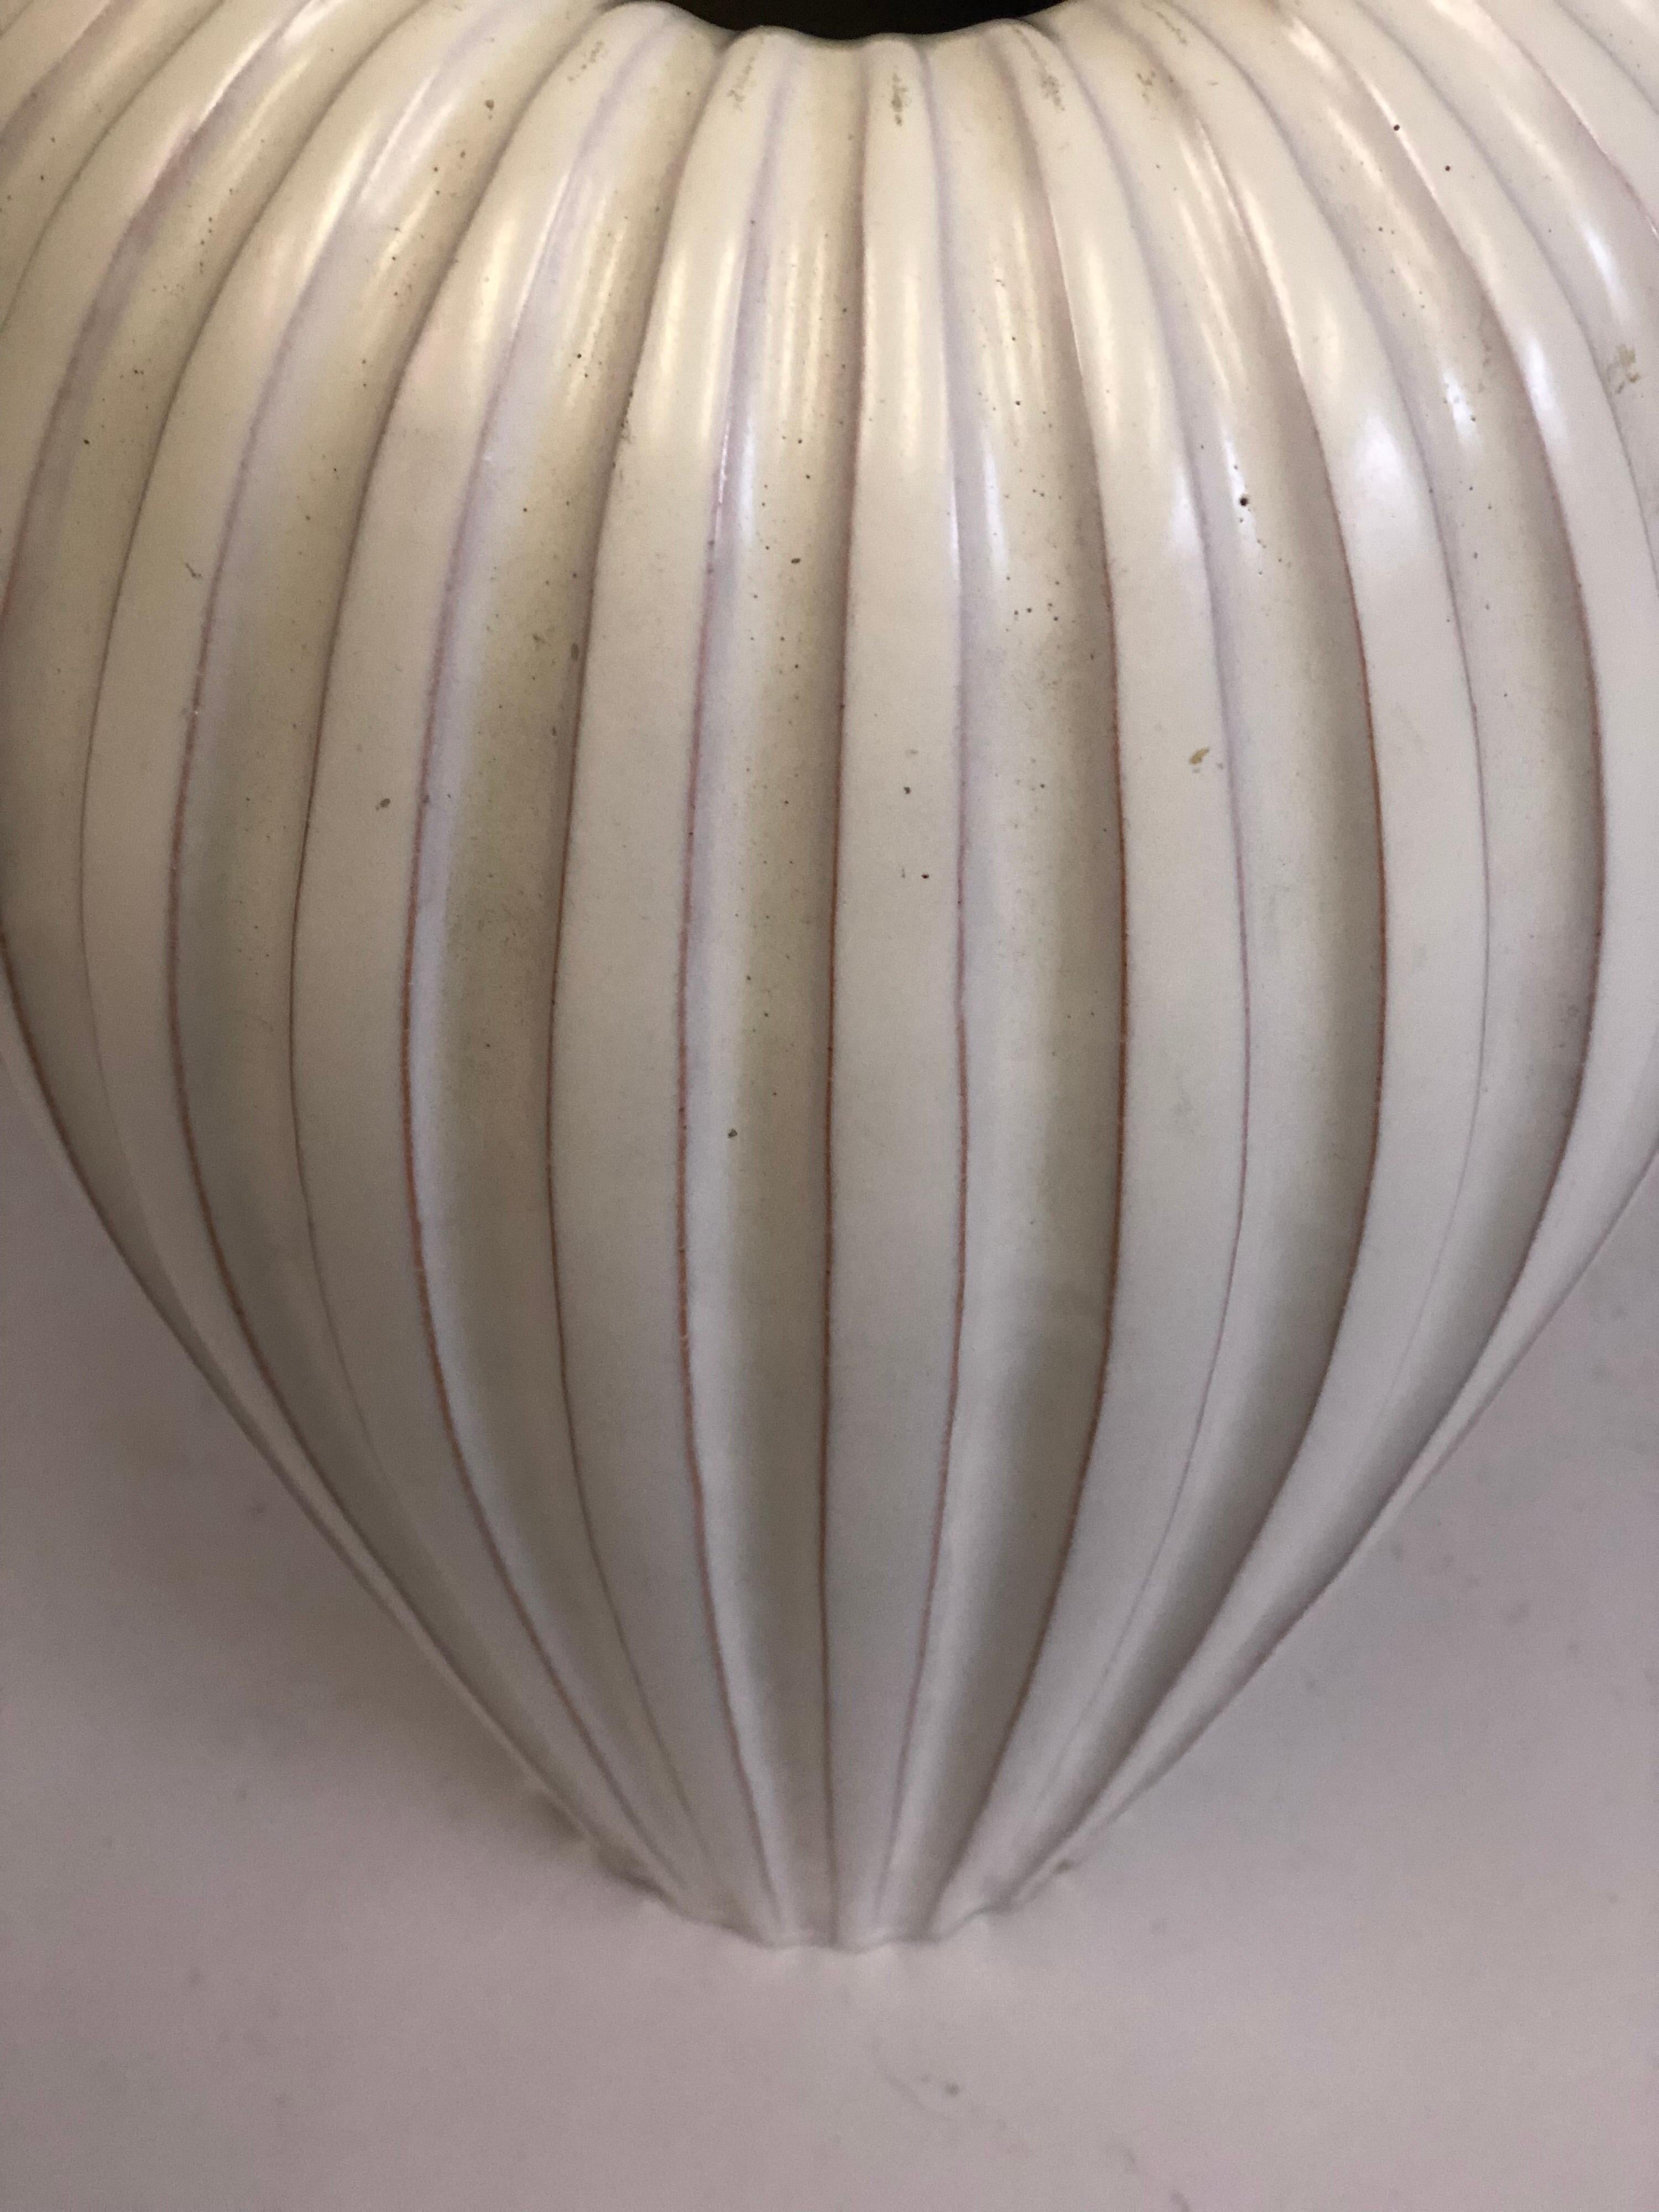 Large Swedish Mid-Century Modern white ceramic table lamp base / vase designed by Vicke Lindstrand for Upsala Ekeby. The form of the piece is elegantly conceived; it is tapered and fluted. The under glaze of the white exterior has burnt reddish